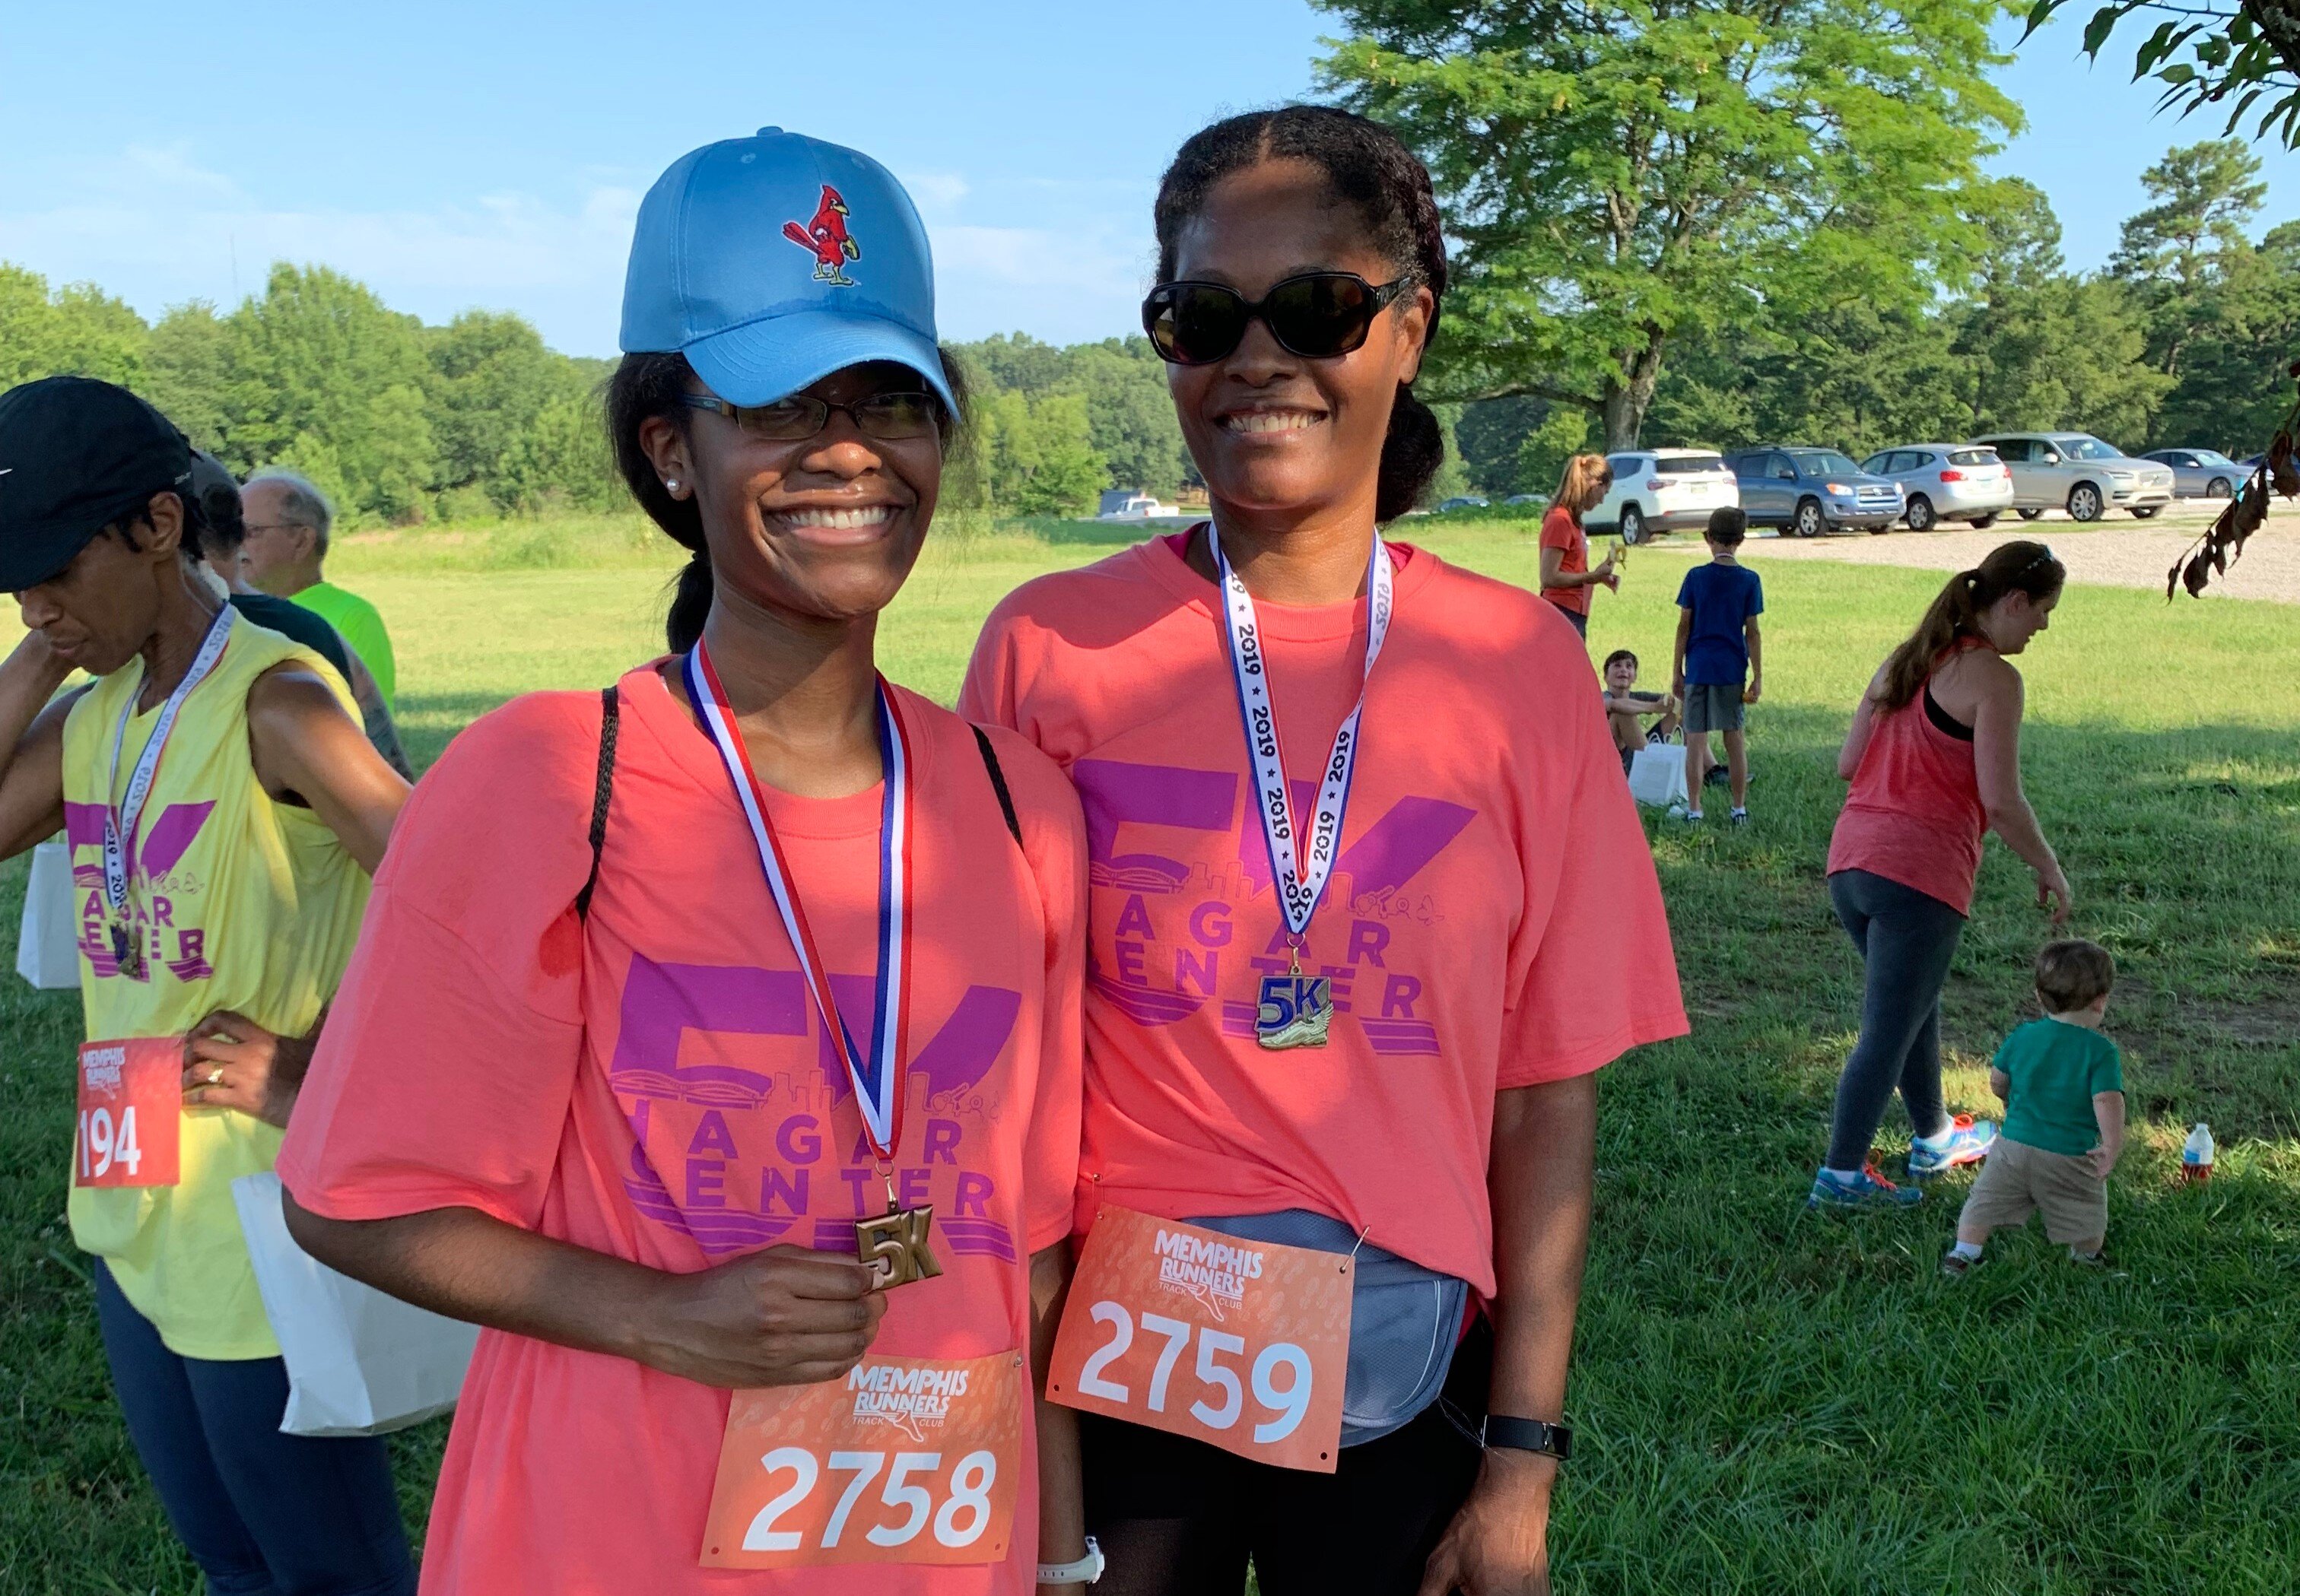 Stephanie Parker-Bradley and her daughter, Faith Bradley, celebrate after completing The Hagar Center 5K Fun Run. (Ashlei Williams)